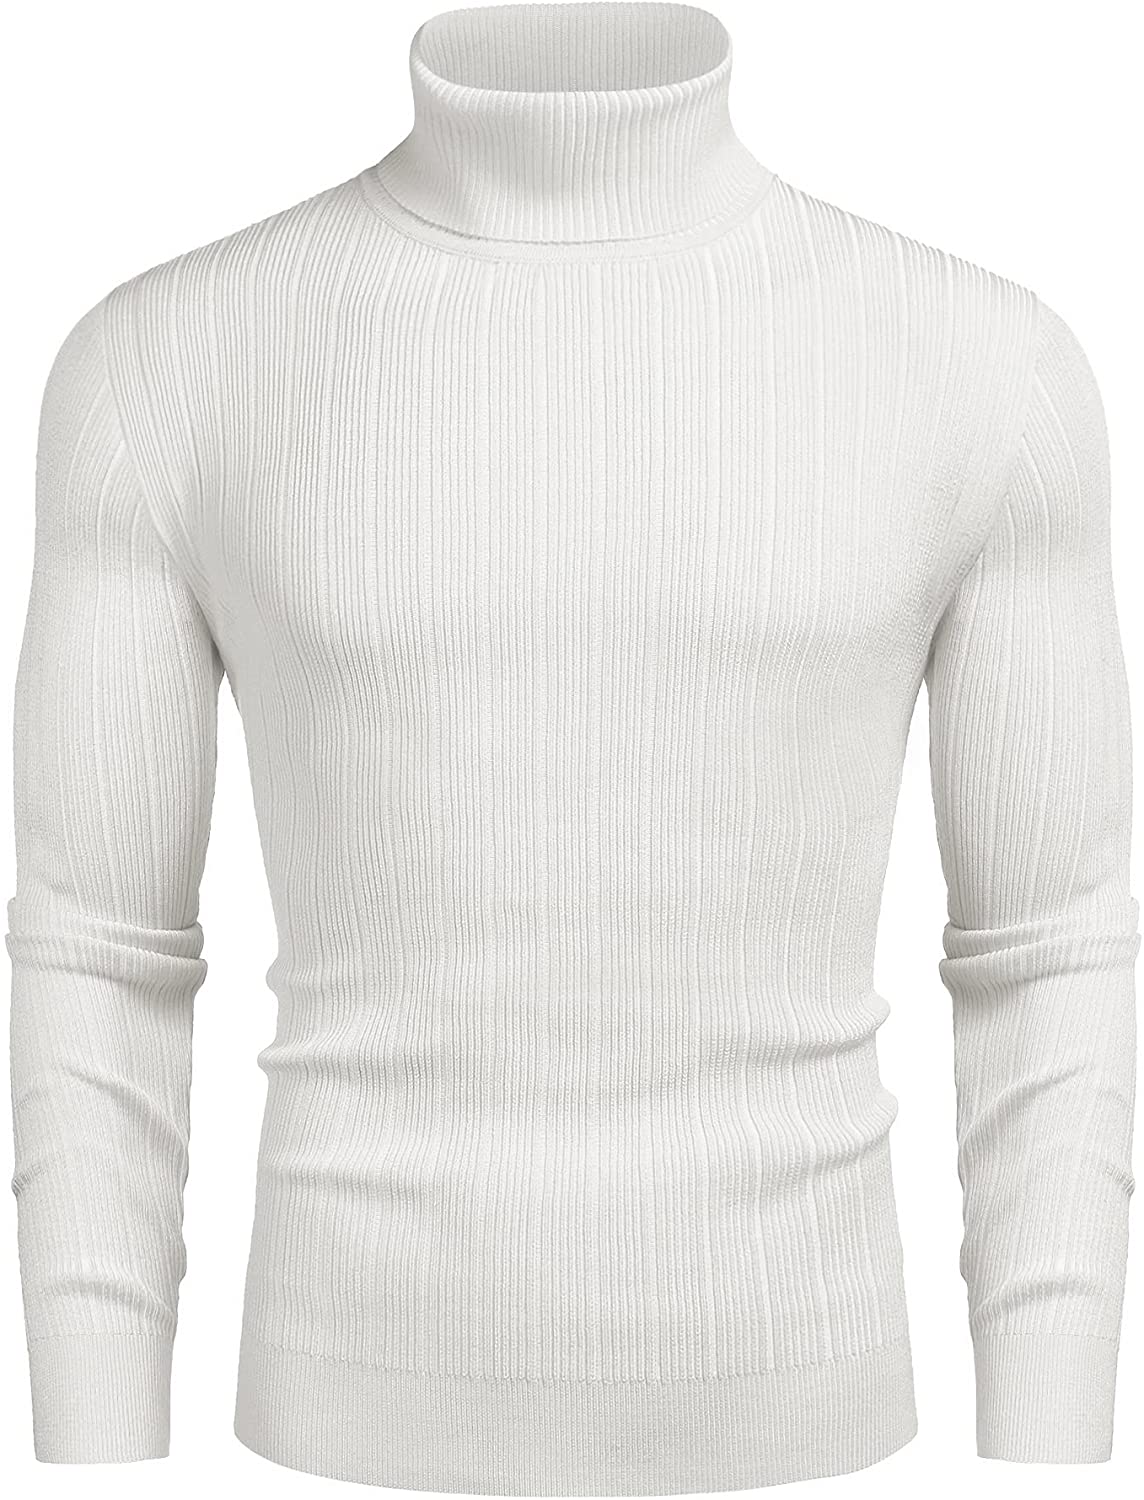 COOFANDY Men's Slim Fit Turtleneck Sweater Ribbed High Neck Pullover Sweaters